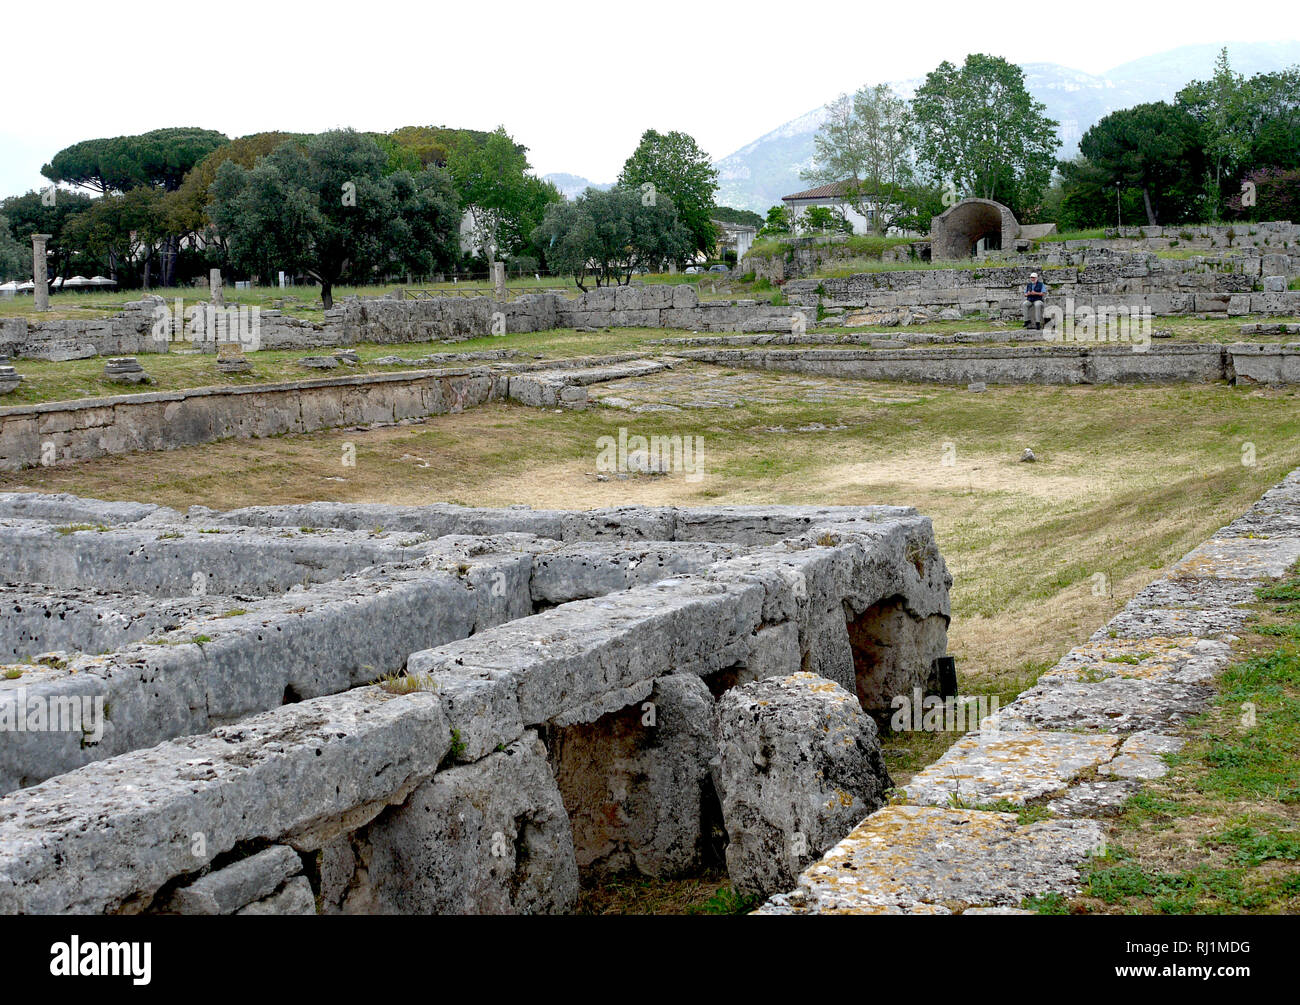 The public pool at the ancient Greek archaeological ruins of Paestum in Southern Italy. Stock Photo